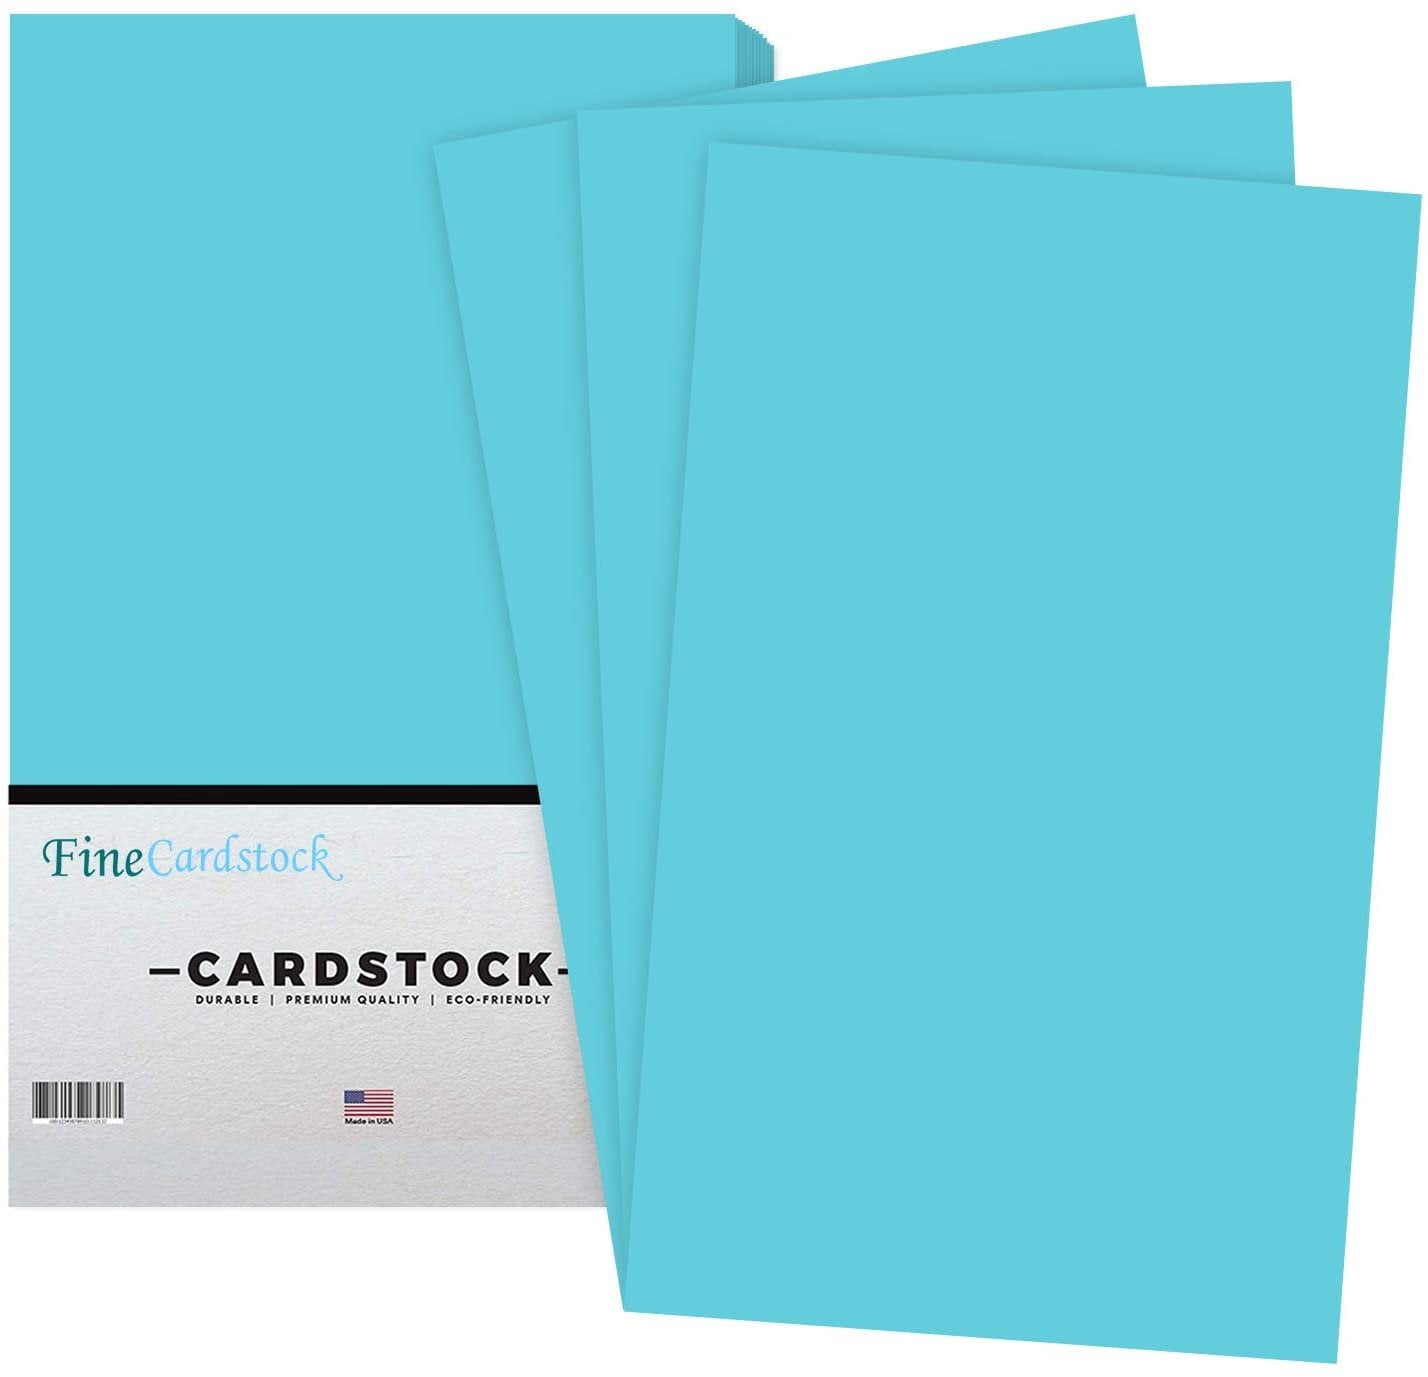 100 Sheets White Cardstock Thick Paper – A4 Blank Medium Weight 70 lb Cover  Card Stock Printer Paper – for Invitations, Scrapbooking, Crafts, DIY